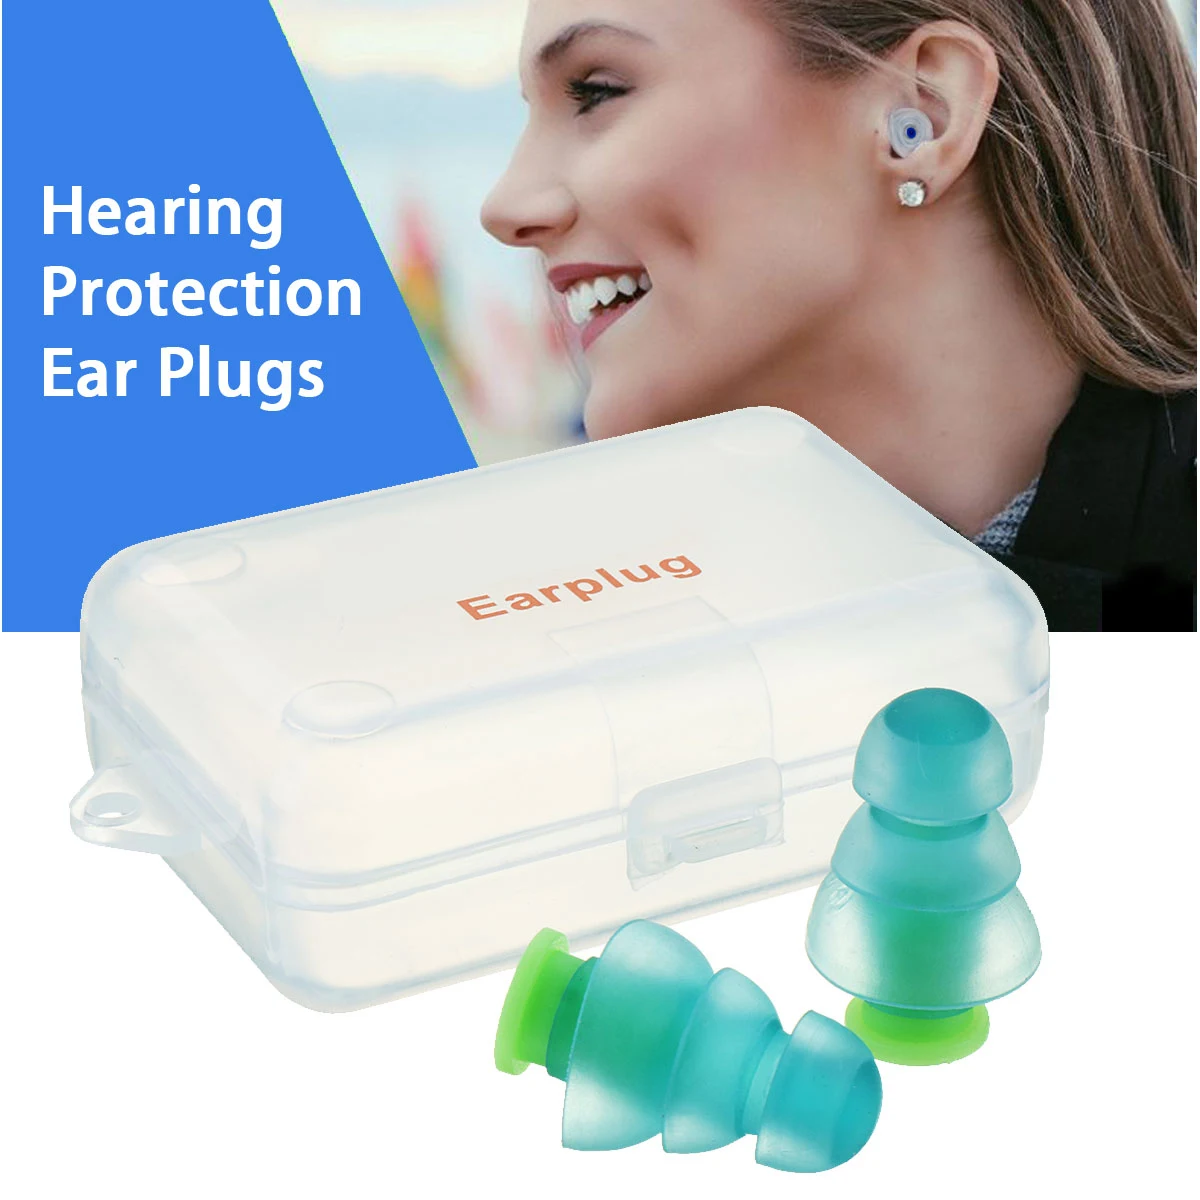 Safurance 1 Pair Noise Cancelling Hearing Protection Earplugs For Concerts Musician Motorcycles Reusable Silicone Ear plugs